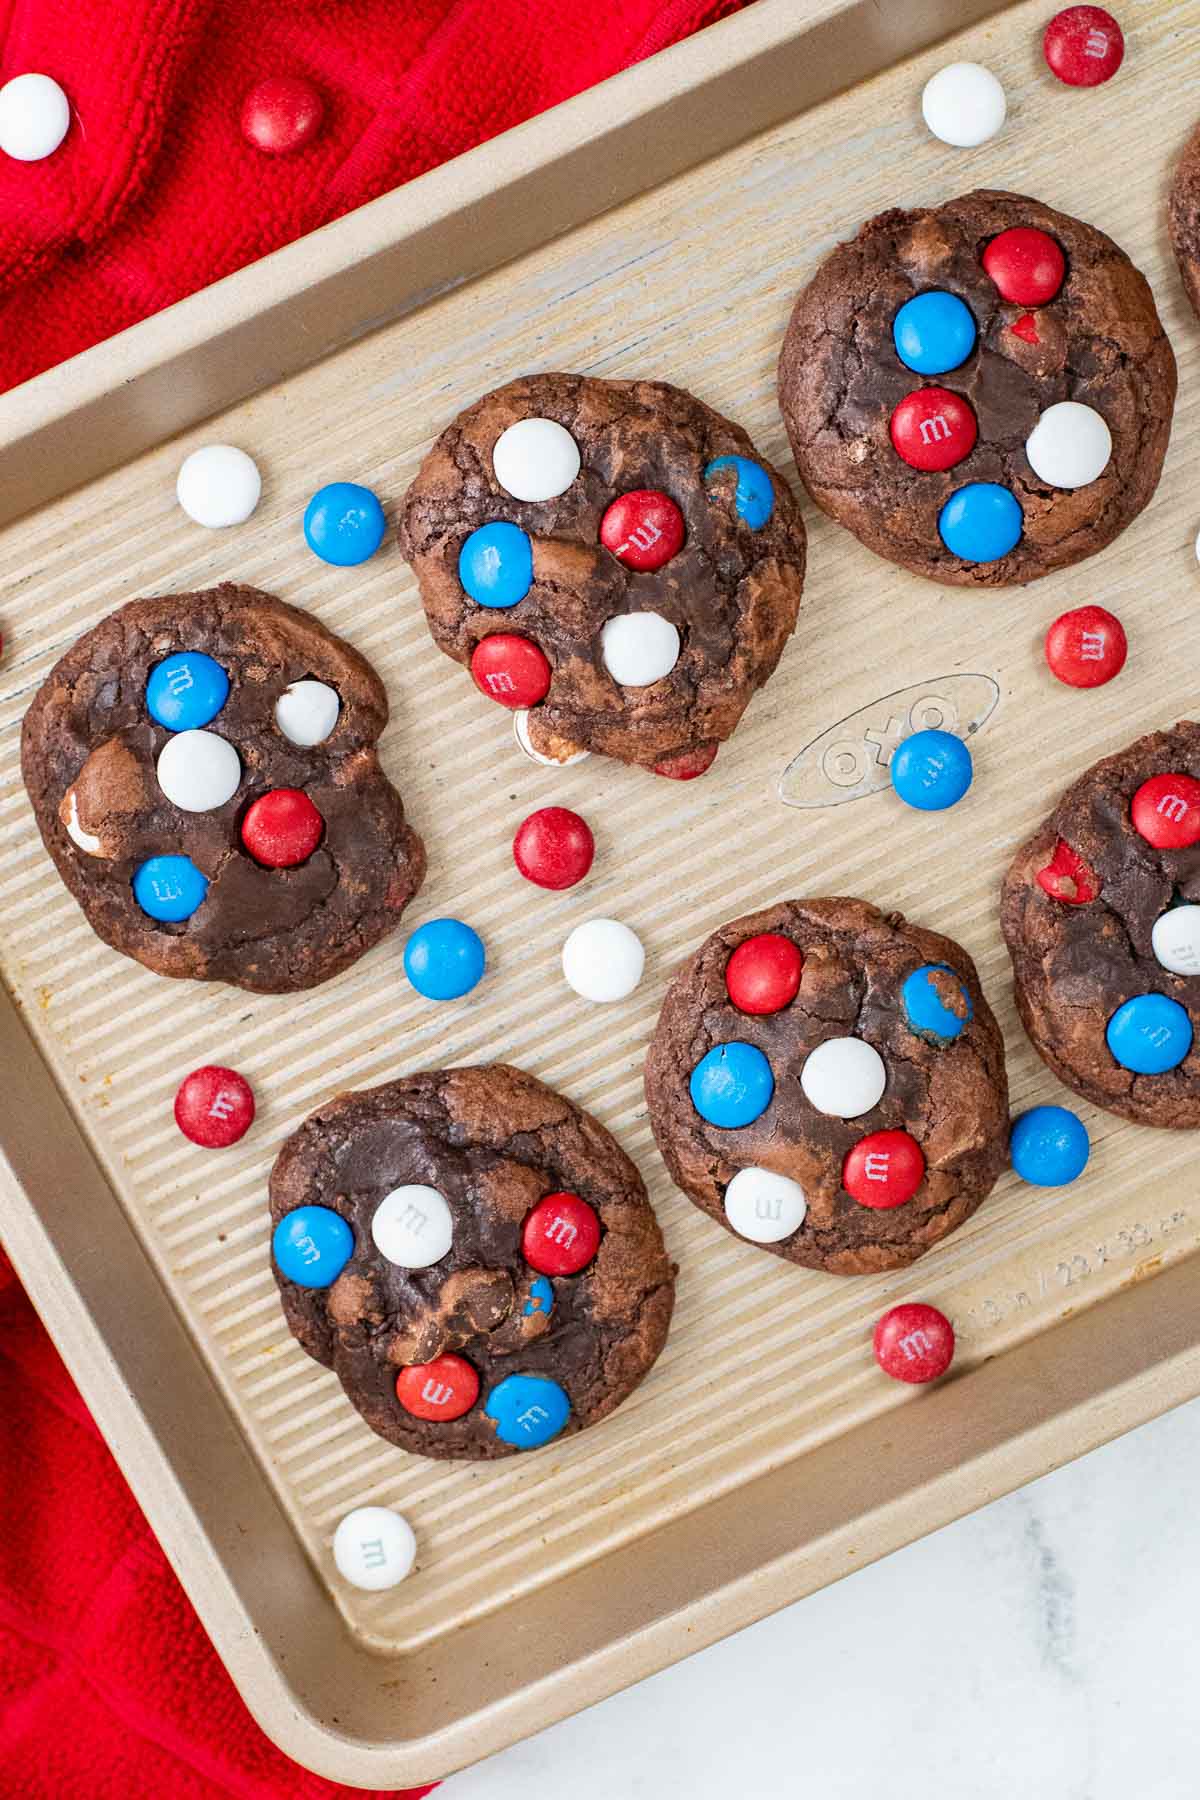 gold colored baking sheet with chocolate cookies with several red white and blue m&m candies